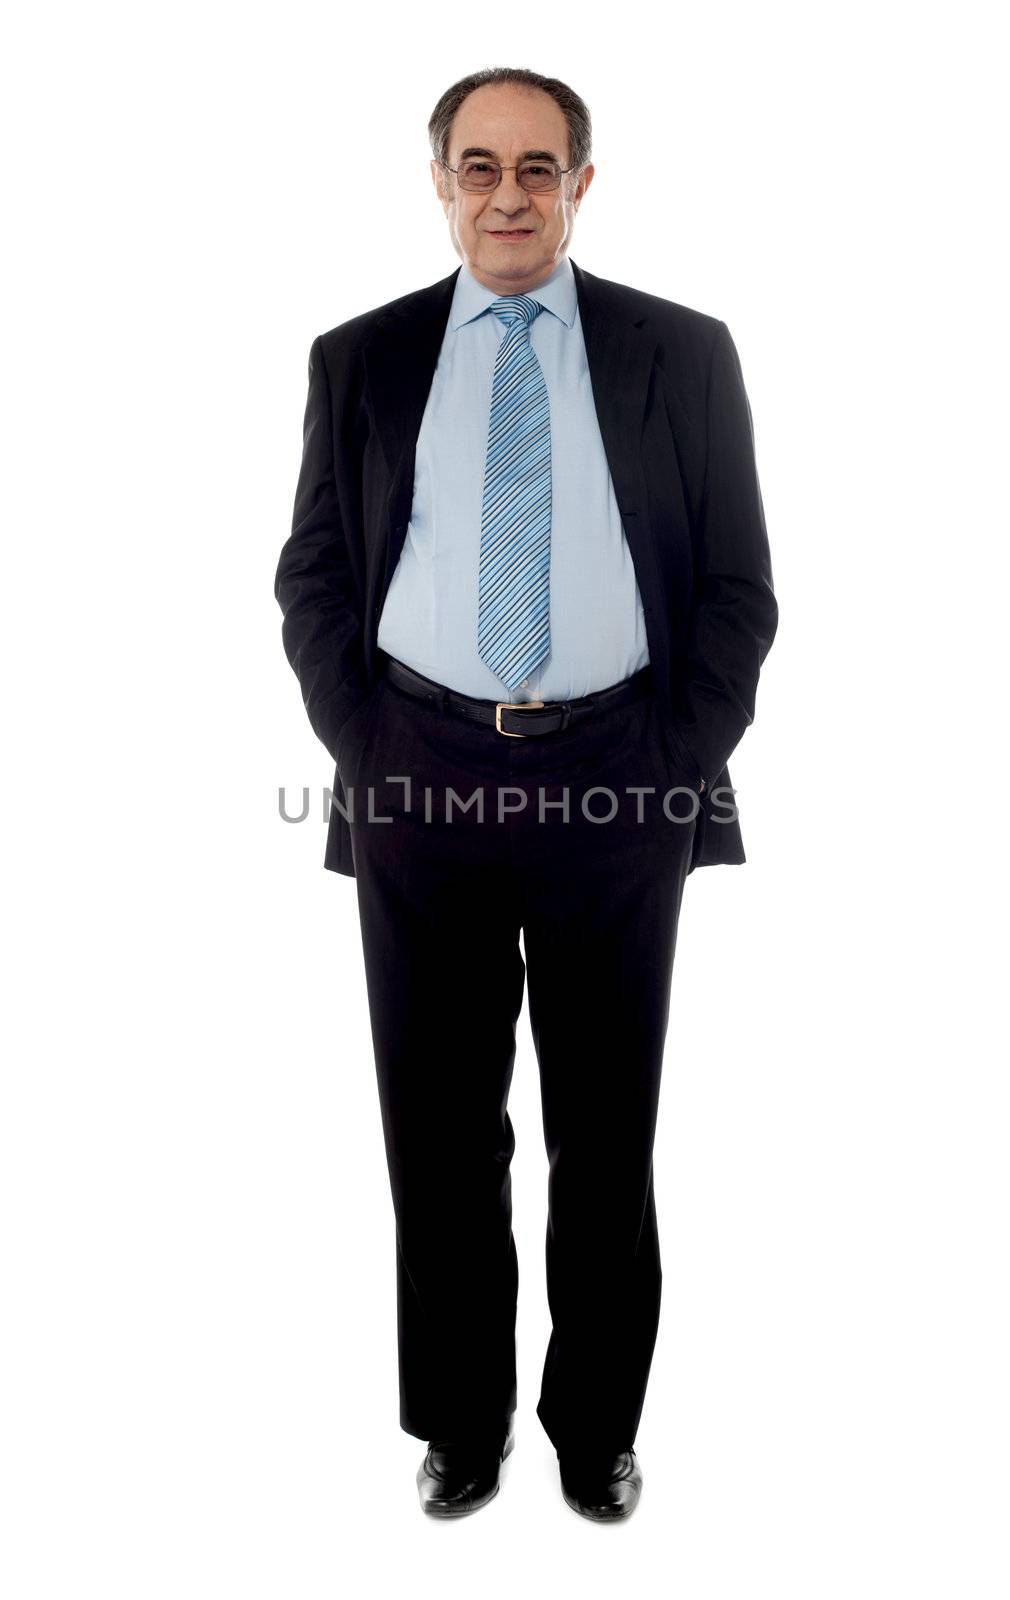 Company manager wearing black suit standing in front of camera with hands in pocket